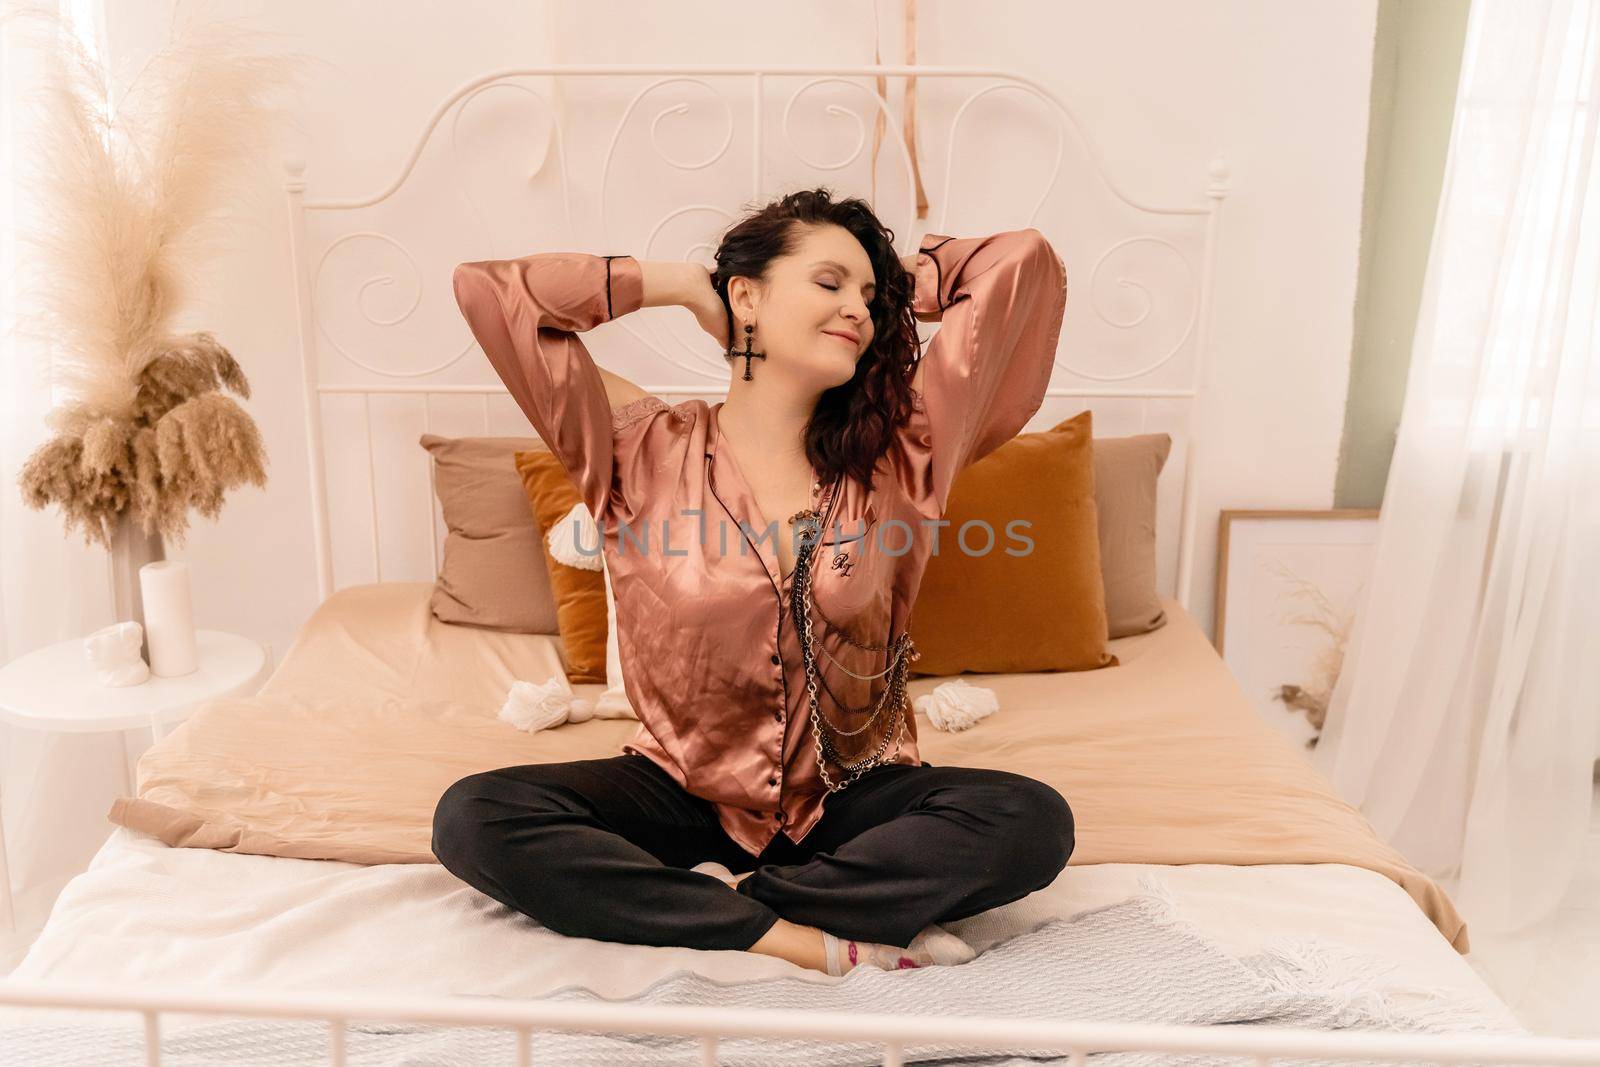 Photo of a middle aged woman in pajamas stretching her arms and smiling while sitting on the bed after sleeping or napping.